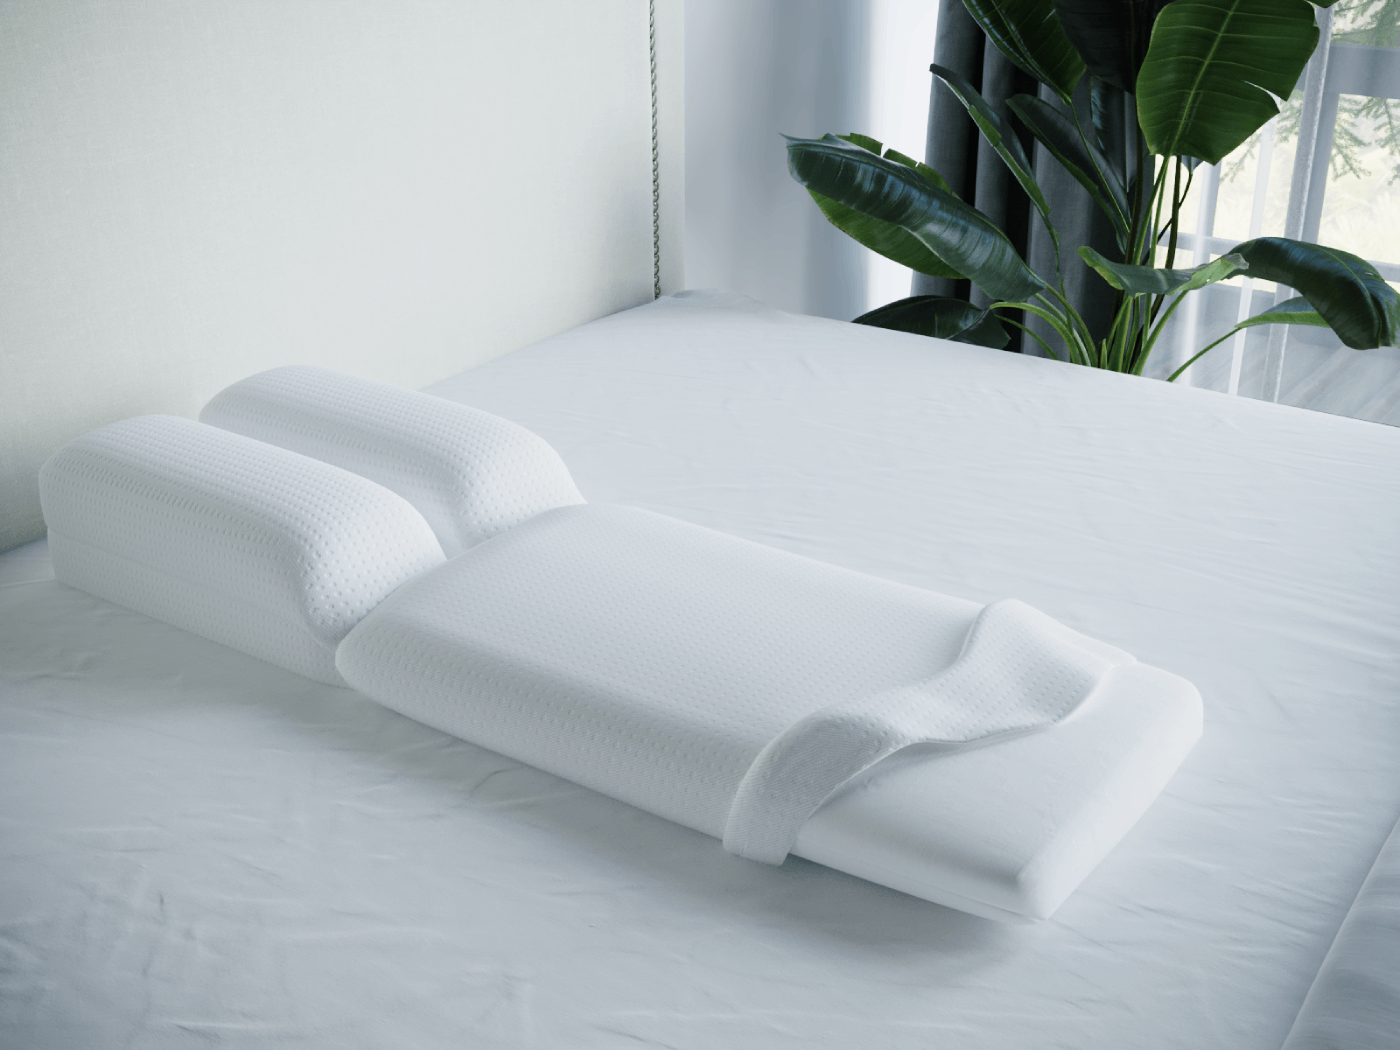 The DaVinci Orthopedic Pillow® for Asthma & Snoring Relief